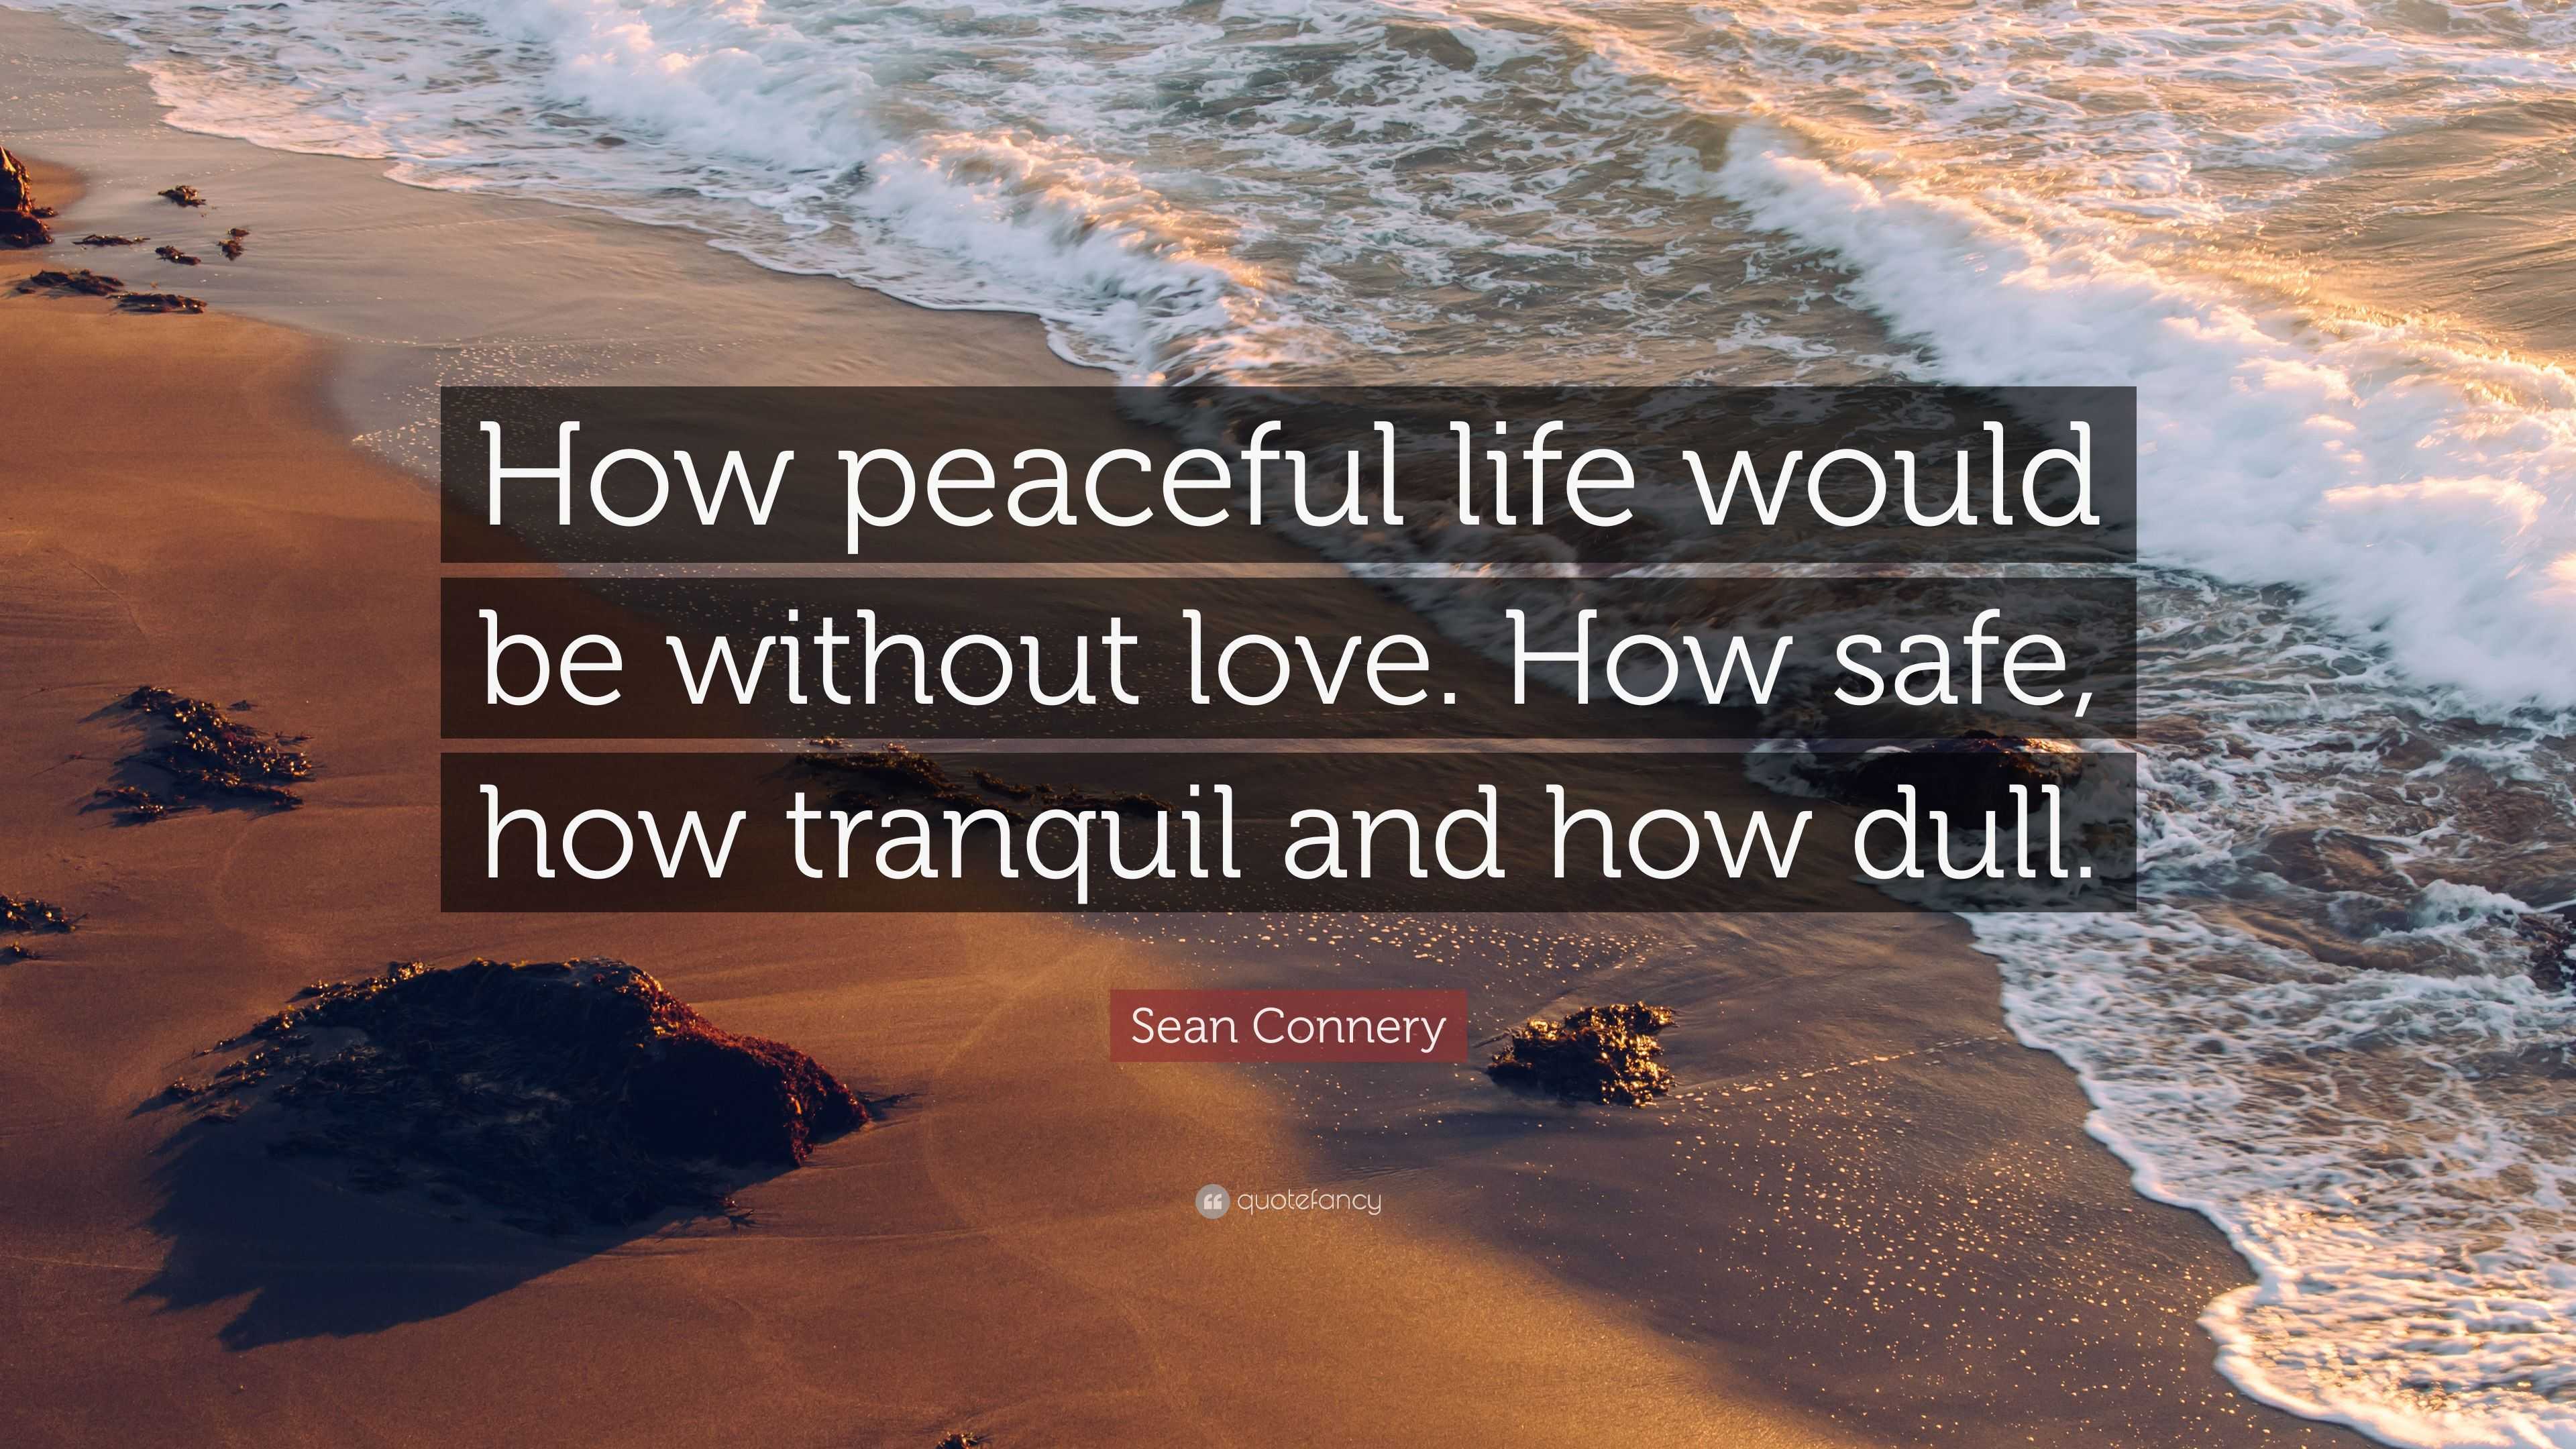 Sean Connery Quote: “How peaceful life would be without love. How safe, how  tranquil and how